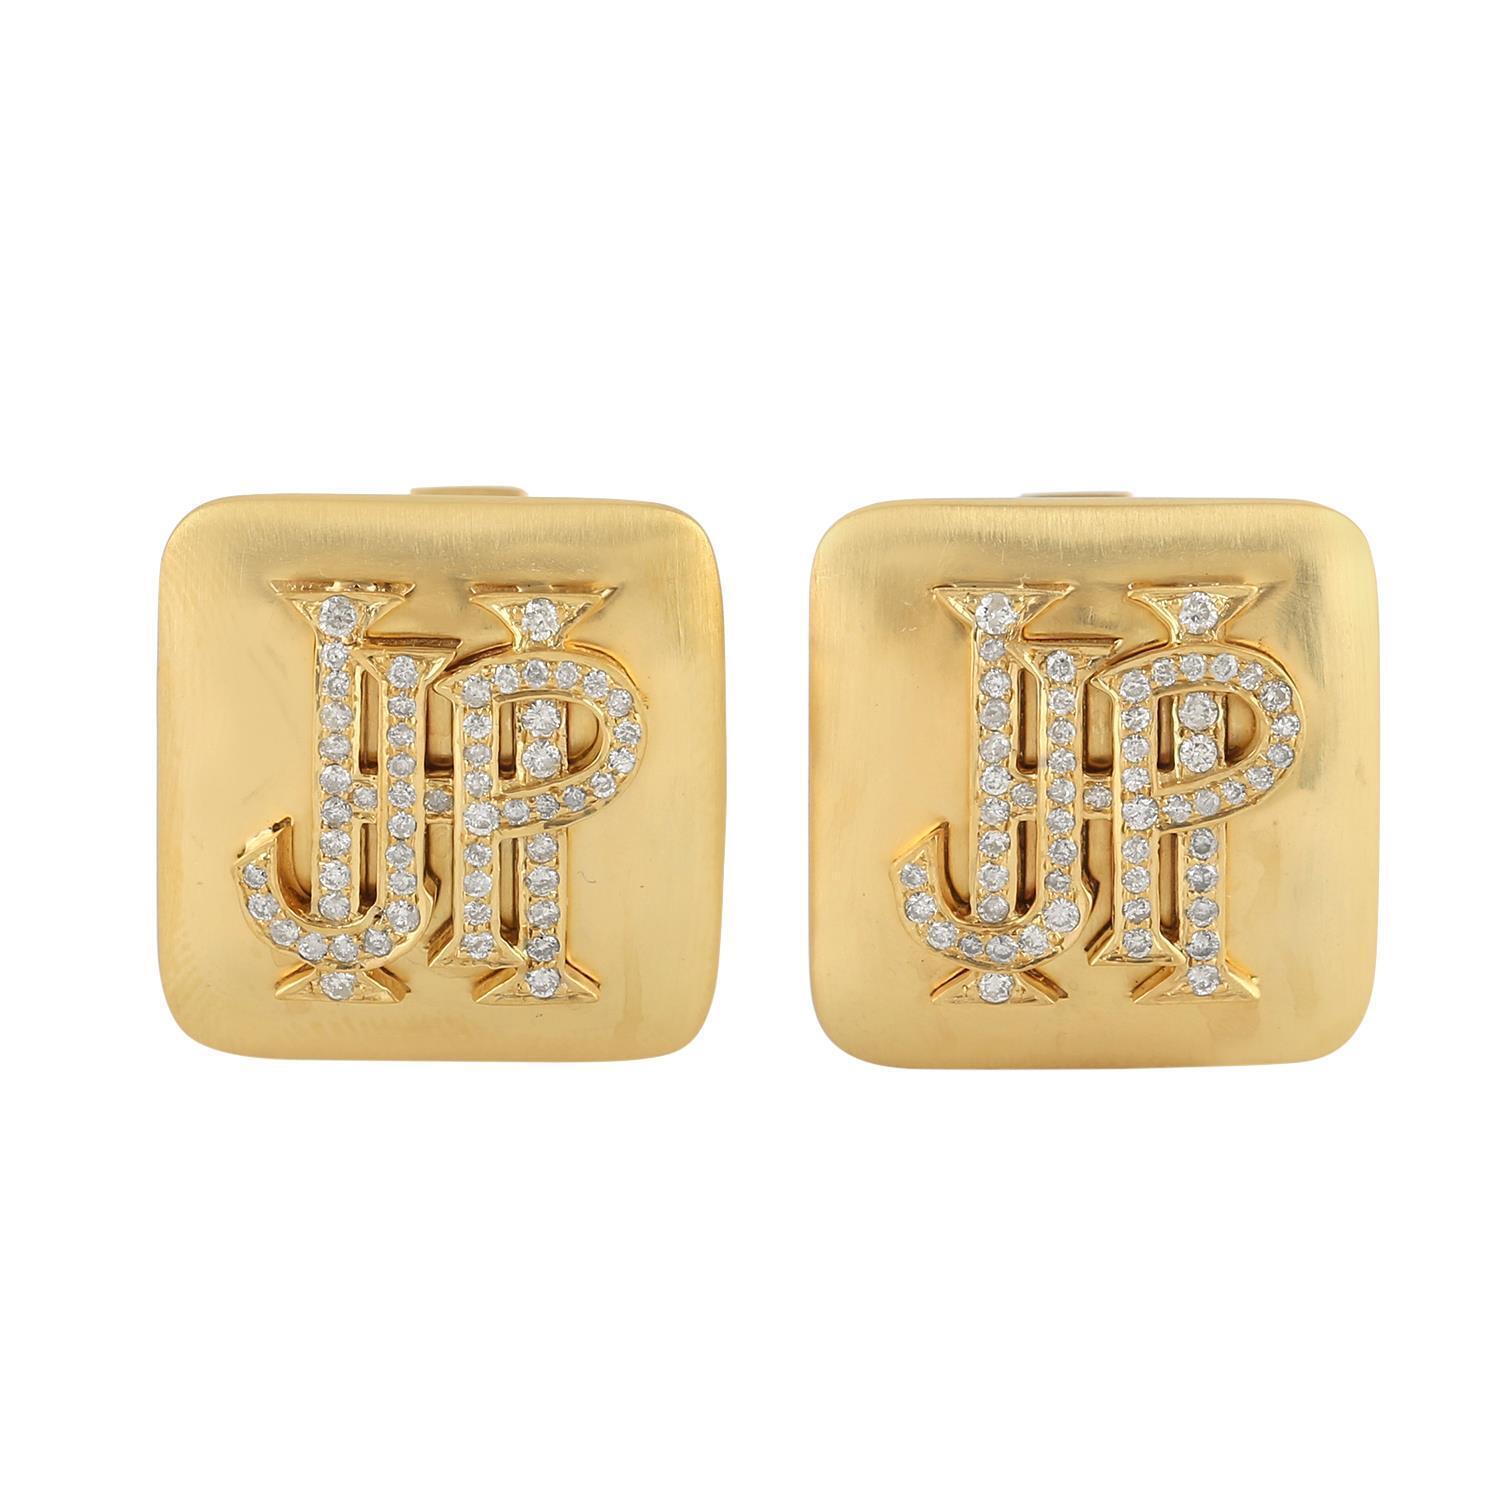 Cast from 14-karat gold, these cuff links are handset with .73 carats of diamonds in yellow gold. See other cufflink collection.

FOLLOW  MEGHNA JEWELS storefront to view the latest collection & exclusive pieces.  Meghna Jewels is proudly rated as a